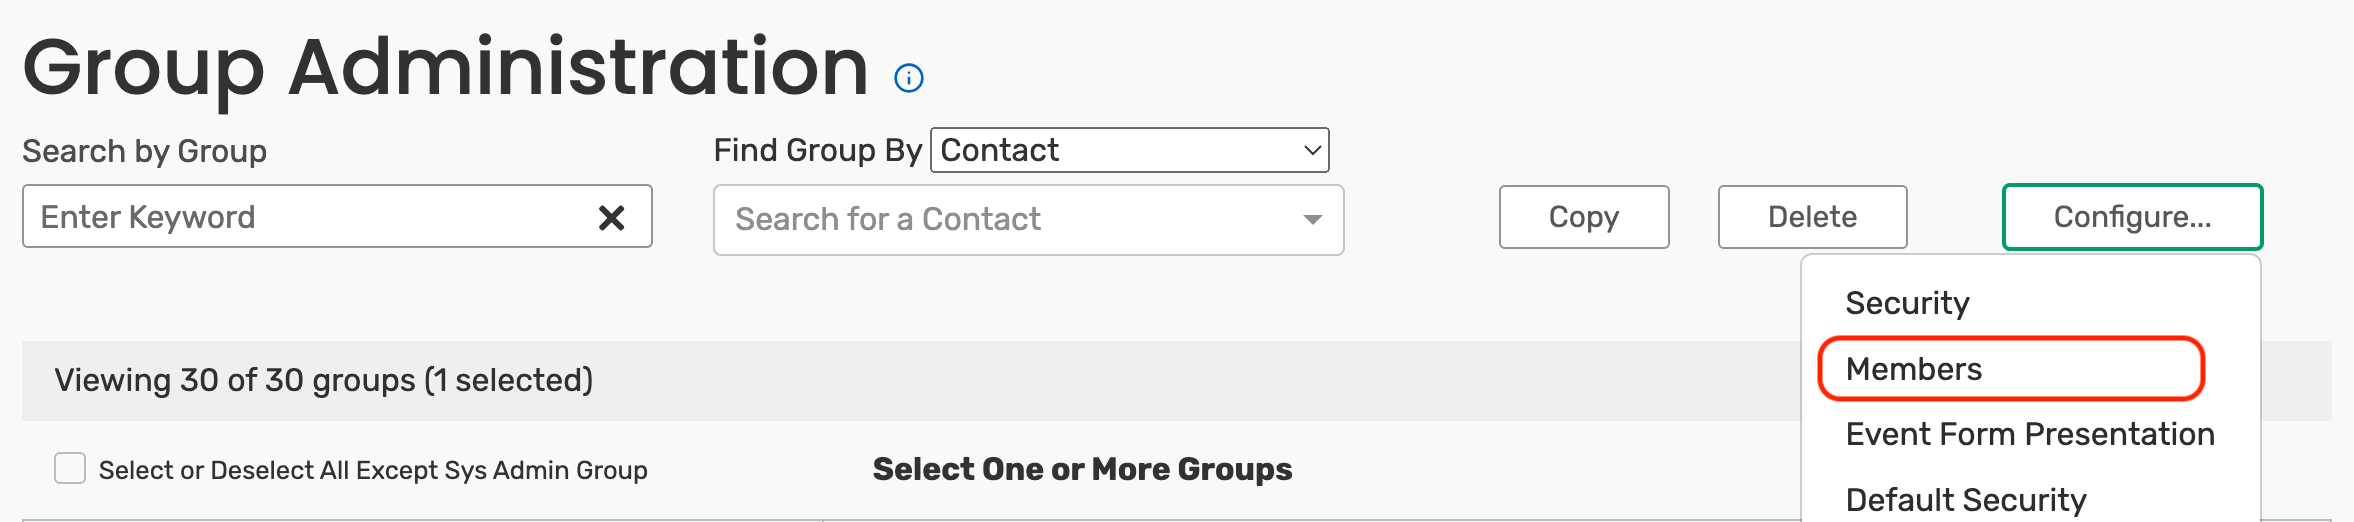 Group administration > configure > members